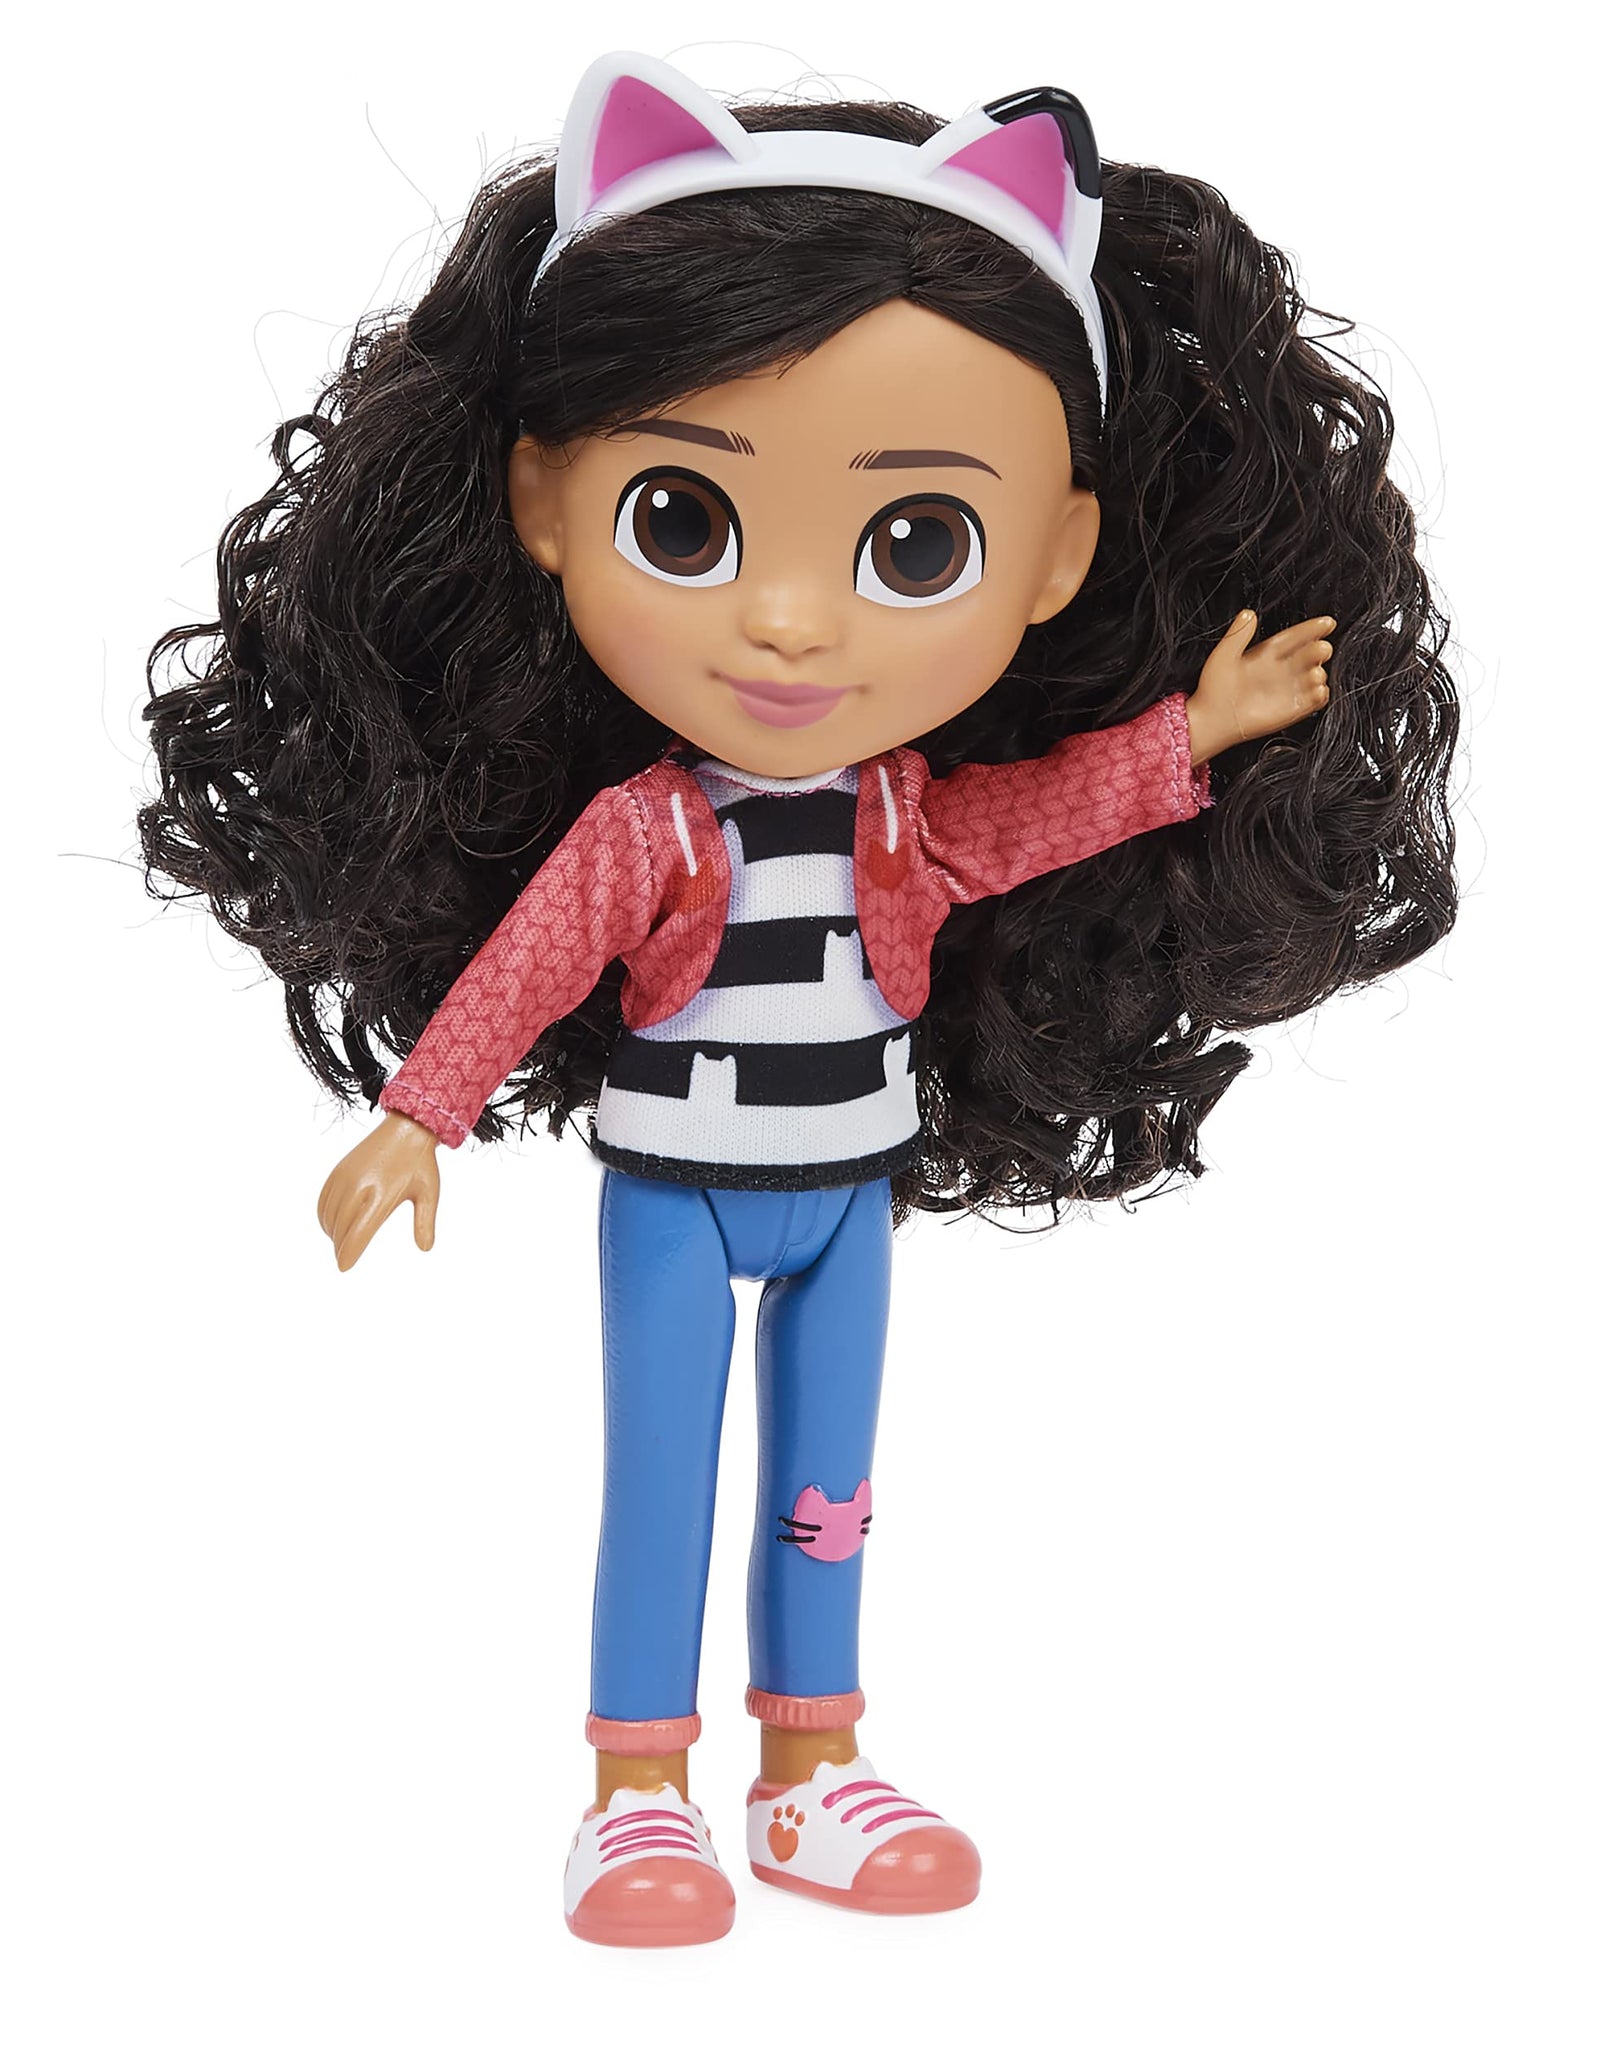 Gabby's Dollhouse, 8-inch Gabby Girl Doll, Kids Toys for Ages 3 and up